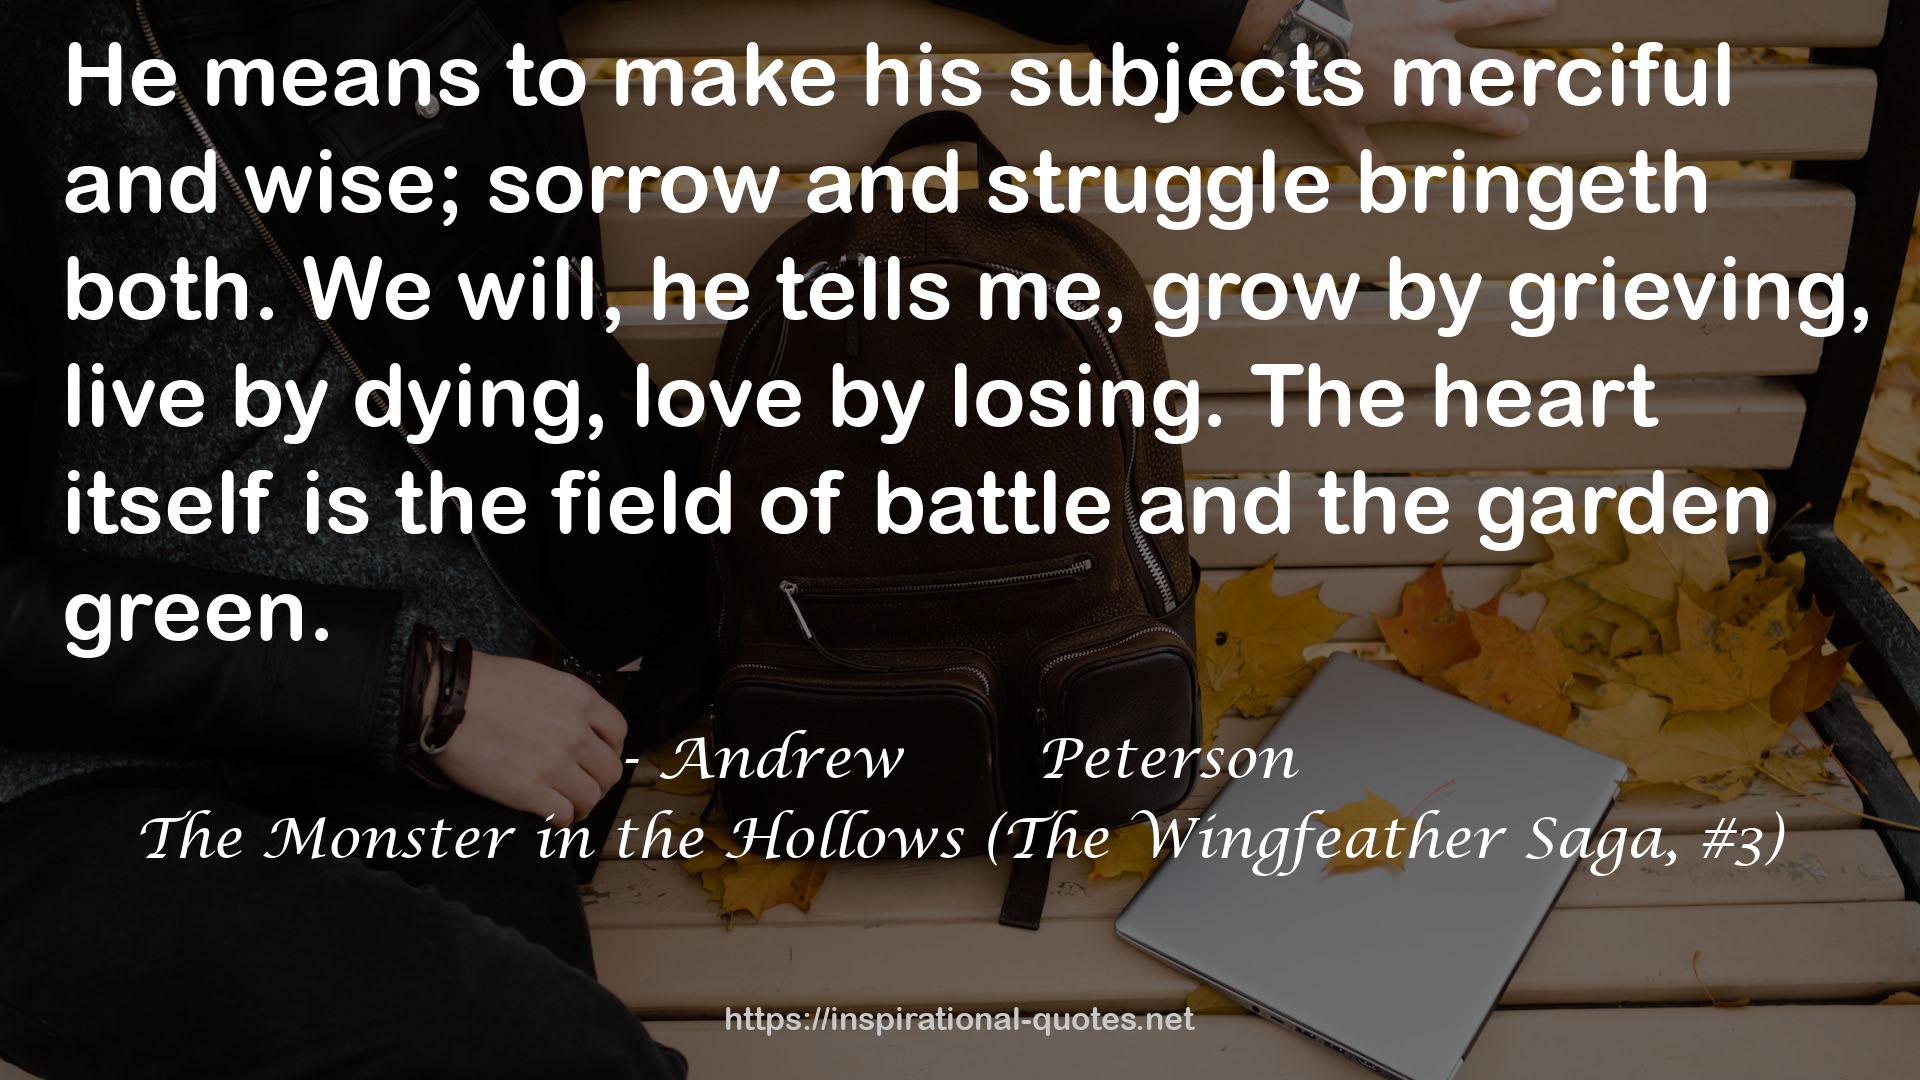 The Monster in the Hollows (The Wingfeather Saga, #3) QUOTES